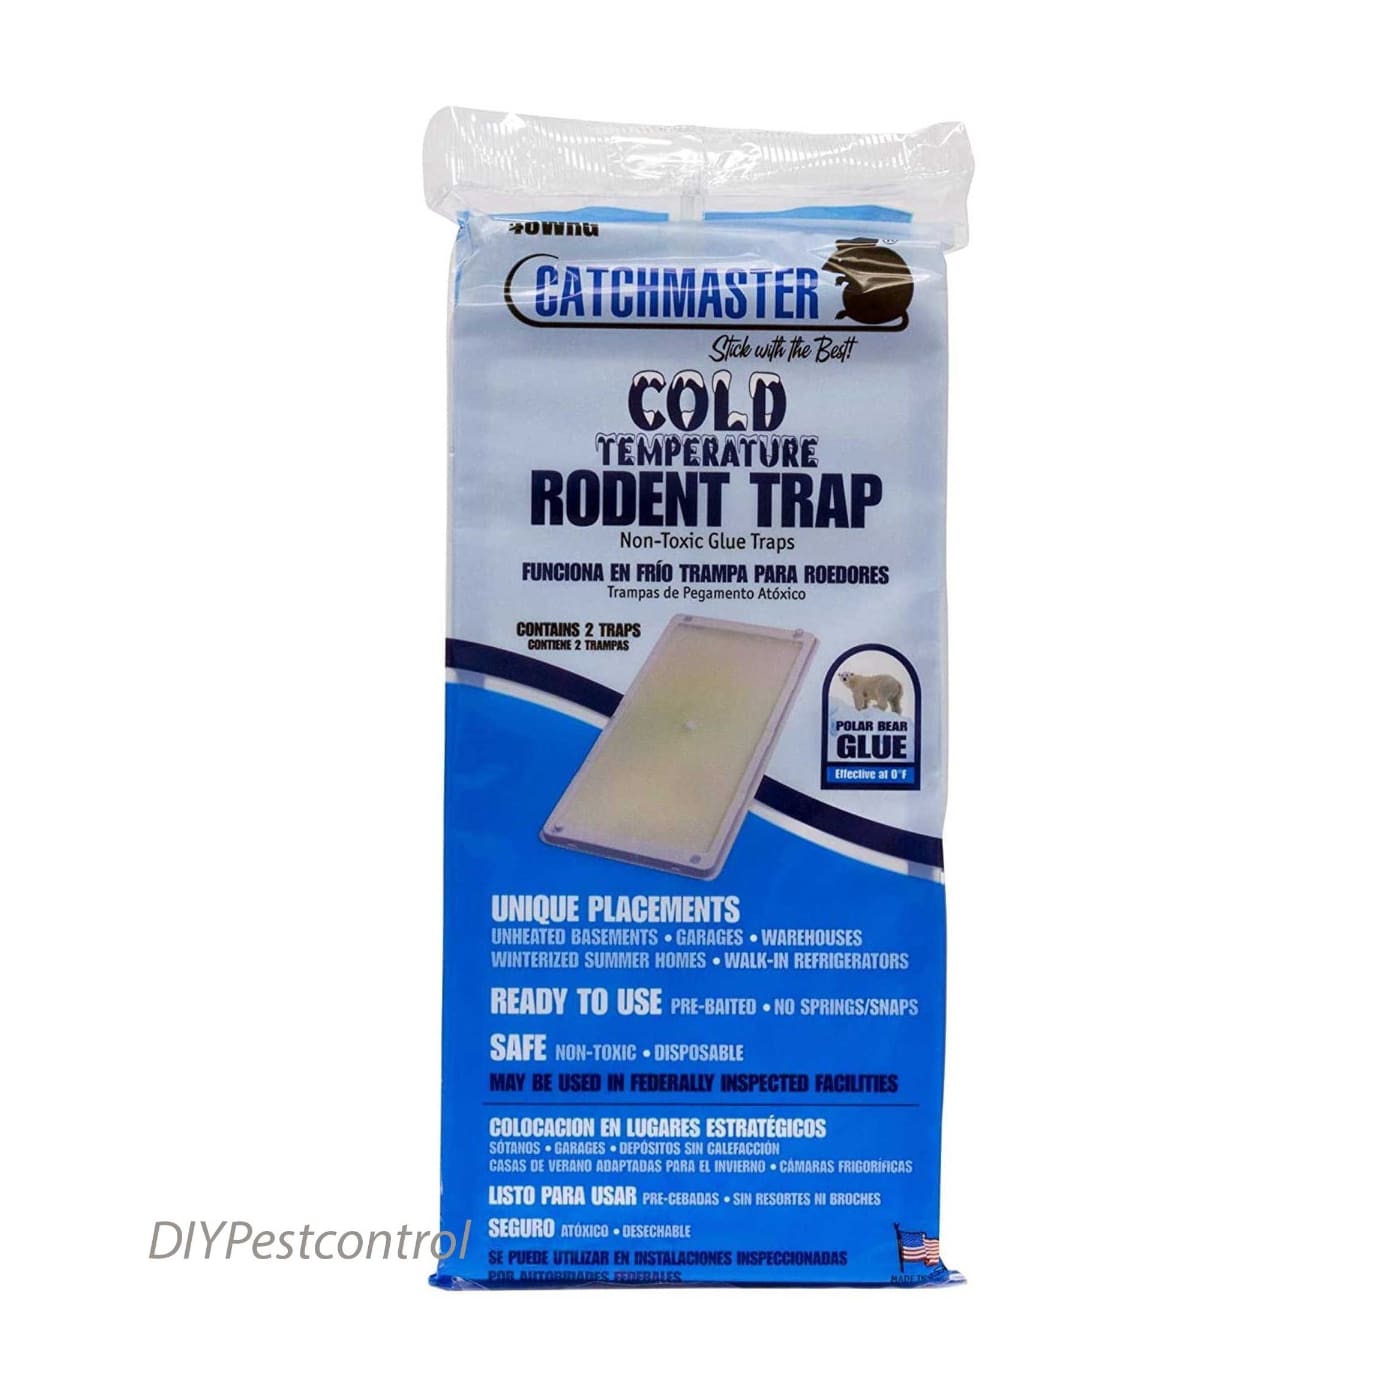  Catchmaster Giant Fly Glue Trap 1-Pack 30 Feet Each